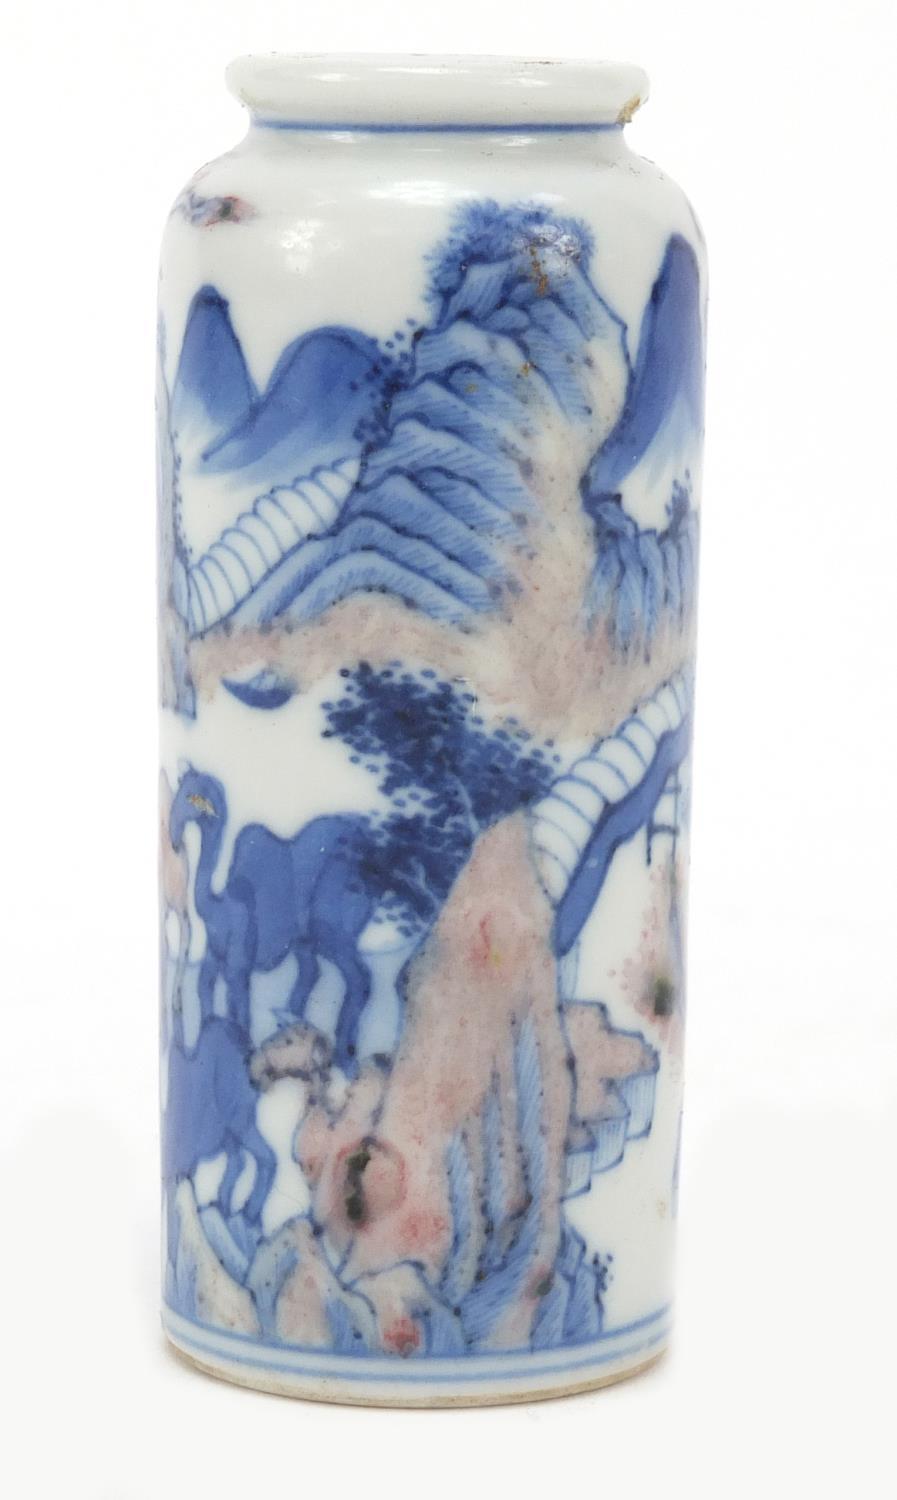 Chinese blue and white with iron red porcelain snuff bottle hand painted with a figure and animals - Image 3 of 8